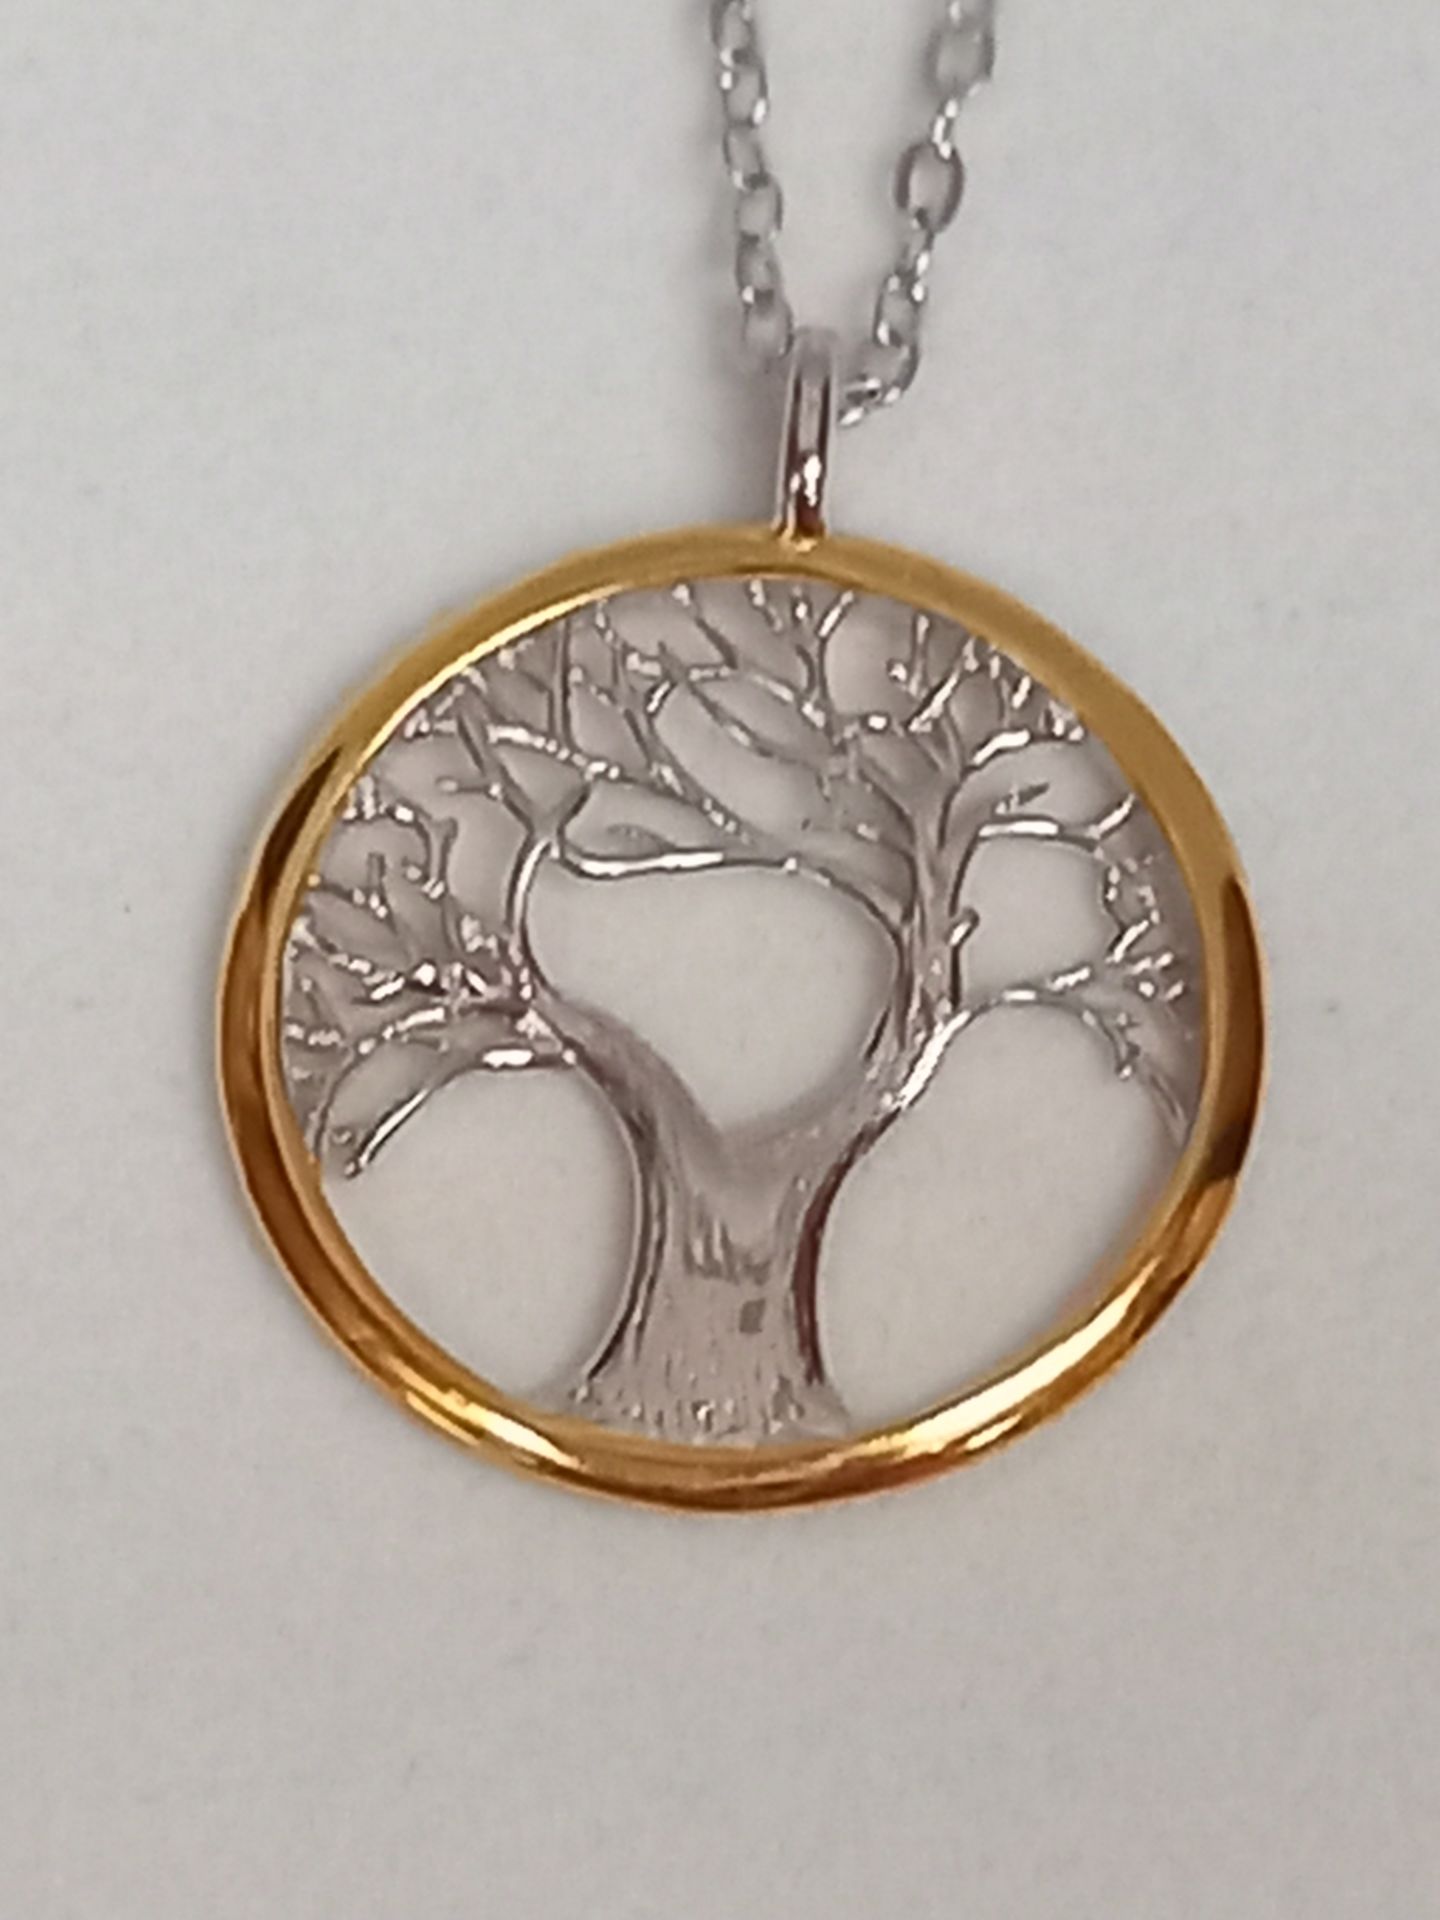 SILVER TREE OF LIFE PENDANT GOLD TRIM - Image 3 of 4